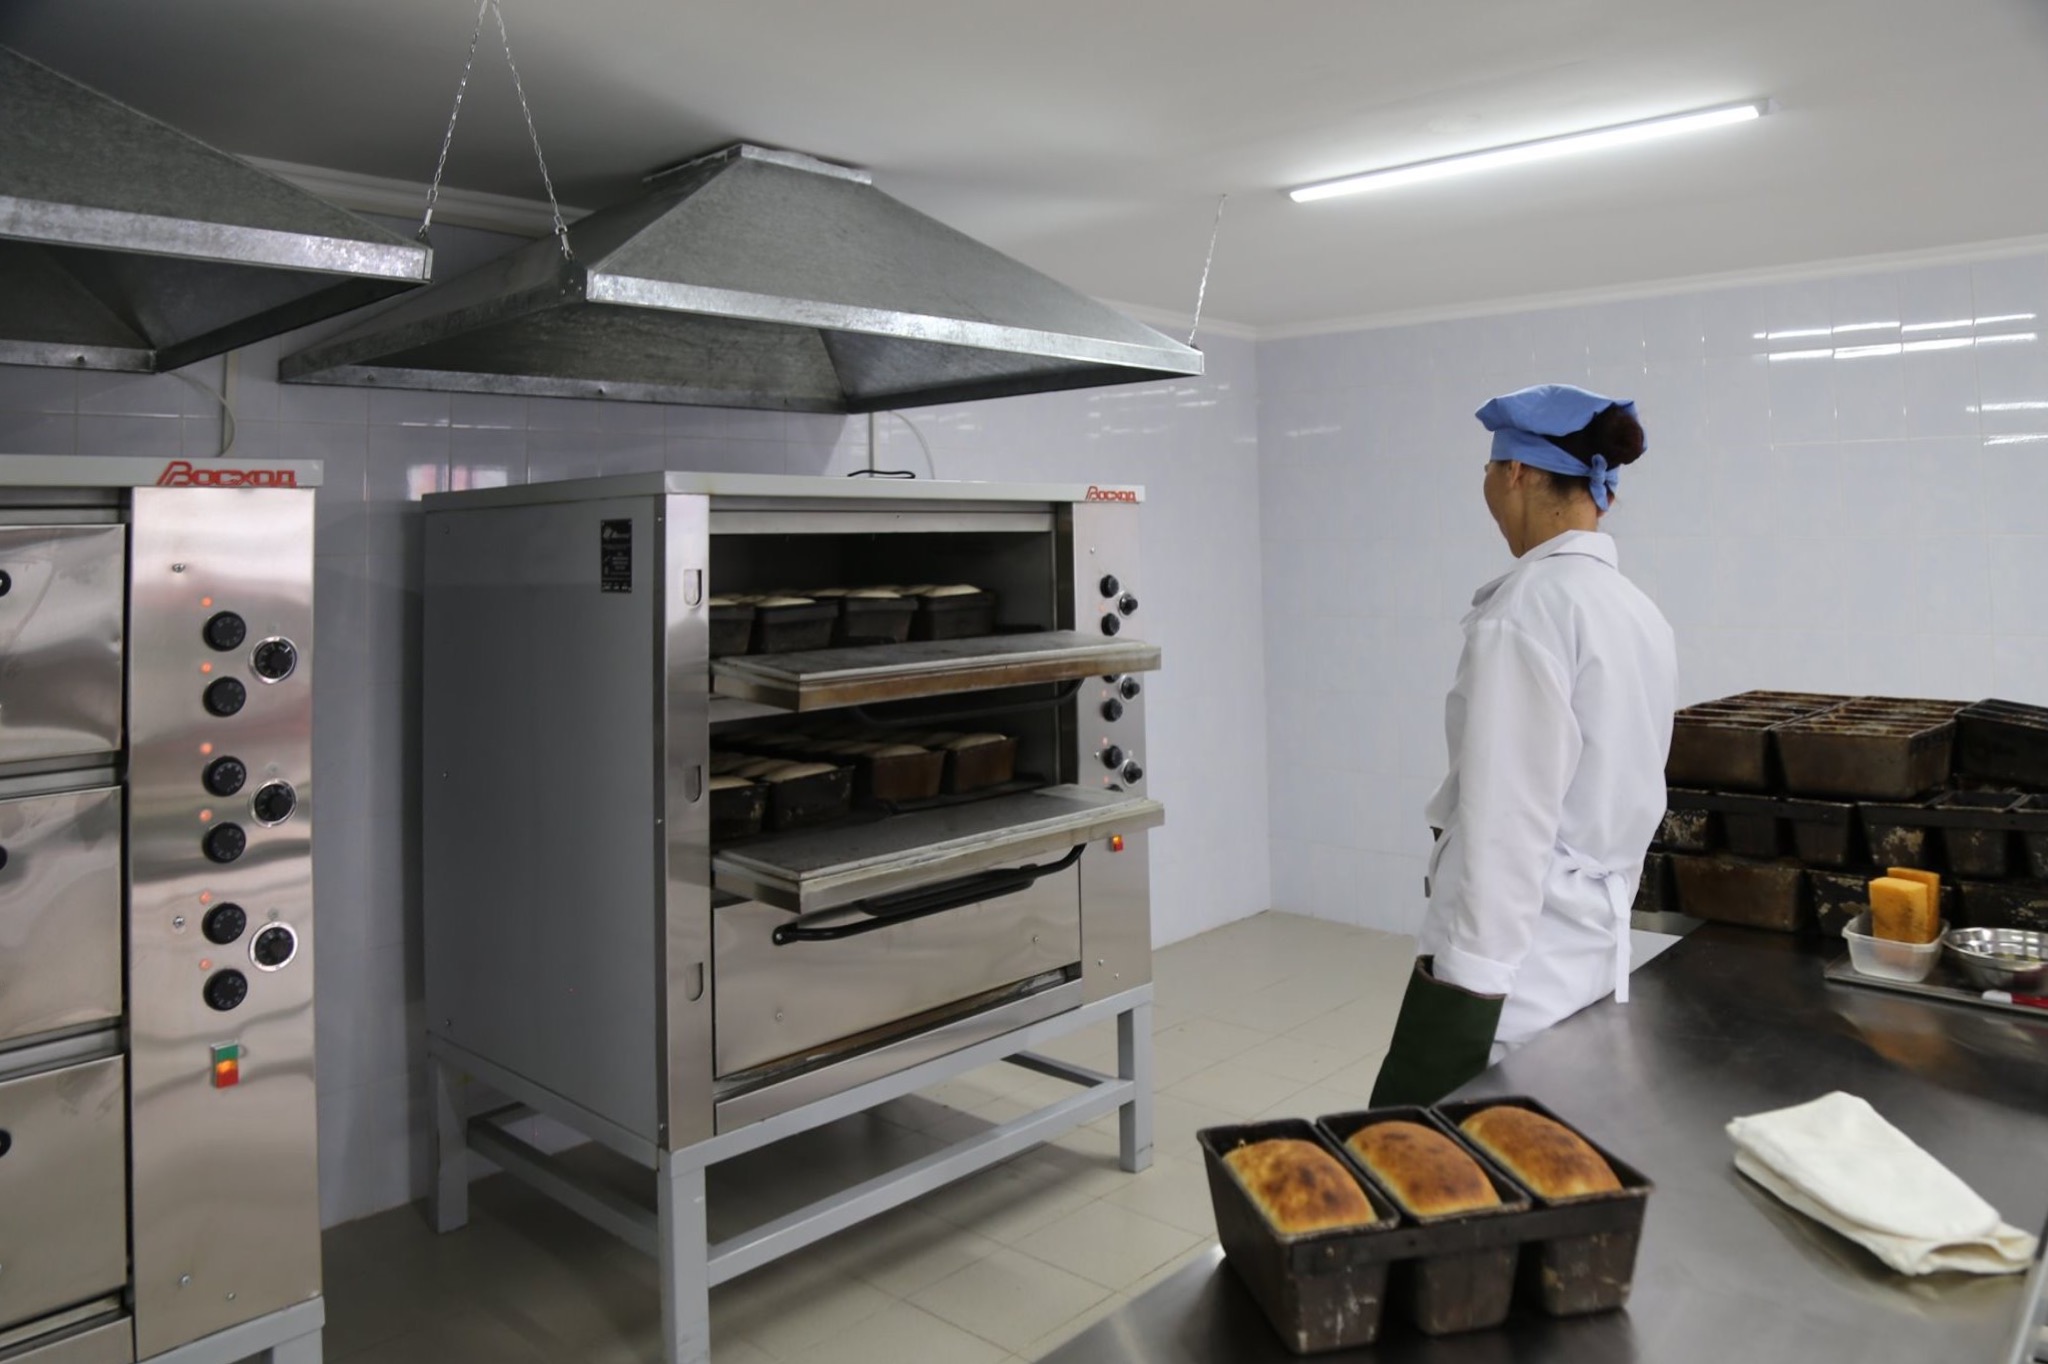 In Kyrgyzstan, a bakery will help rehabilitate female prisoners